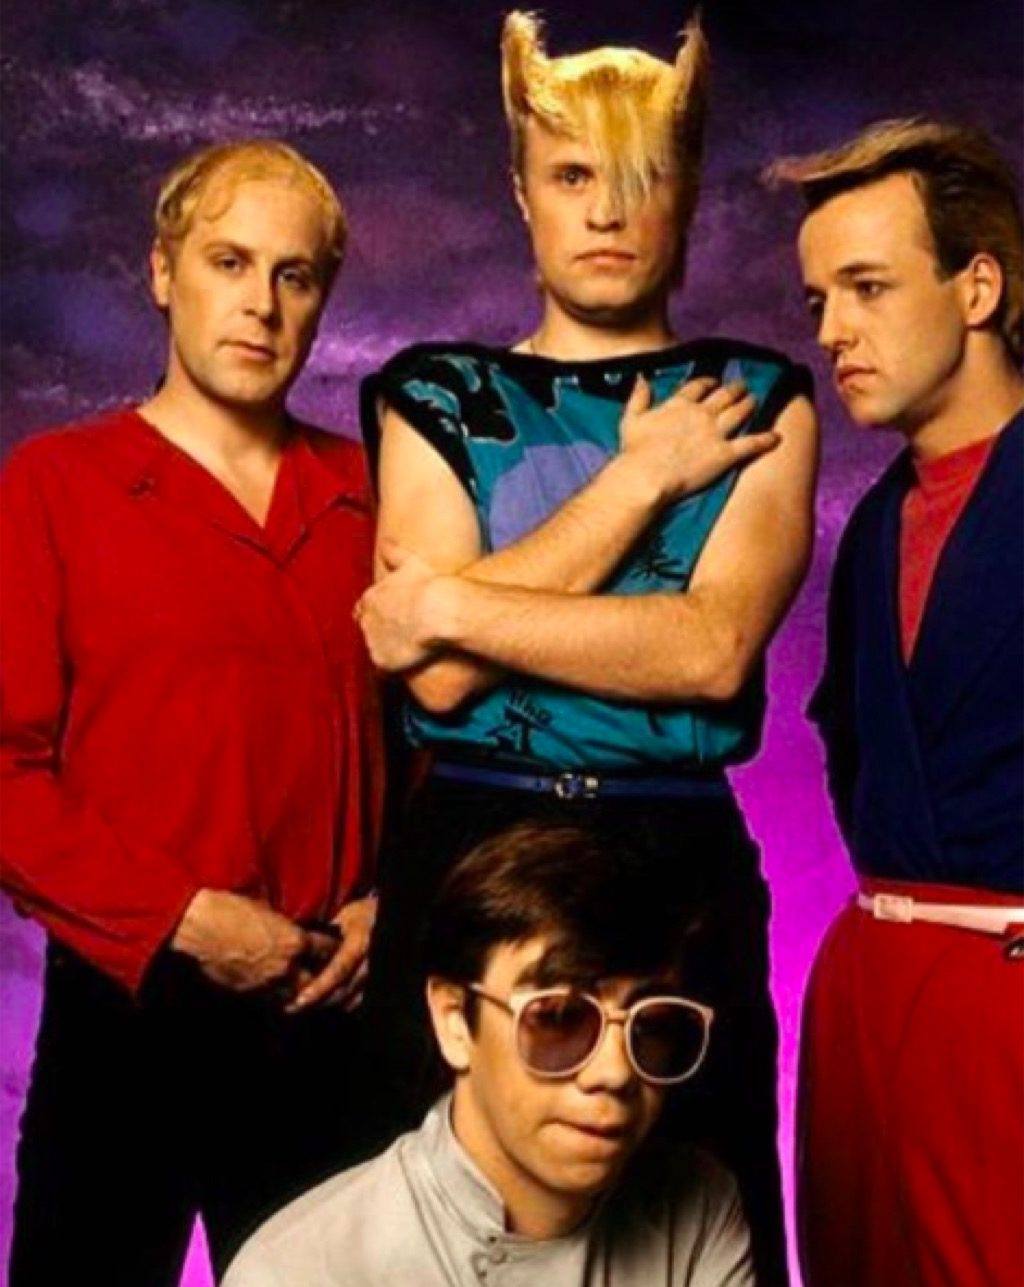 British band A Flock of Seagulls in the 1980s